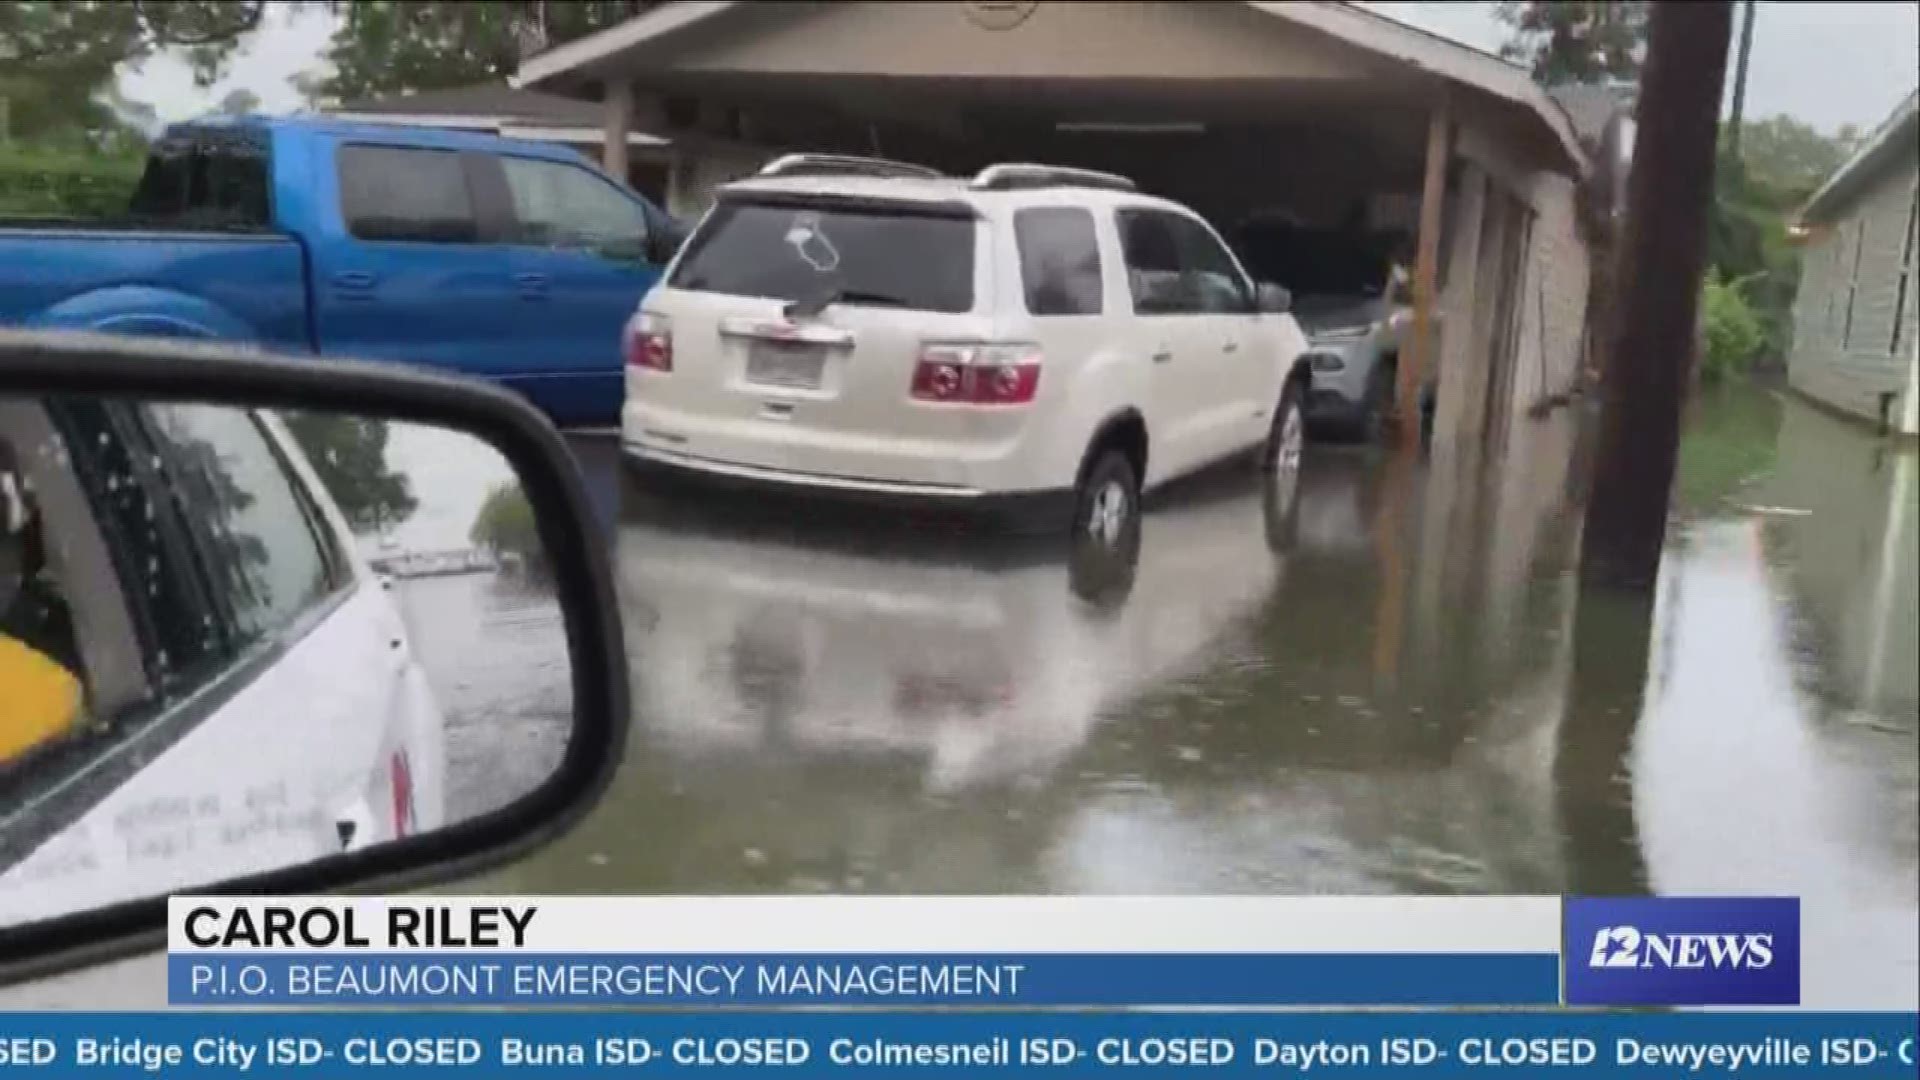 Carol Riley, a spokesperson for City of Beaumont Emergency Management, gives an update on Imelda recovery and relief efforts on Sept. 20, 2019.